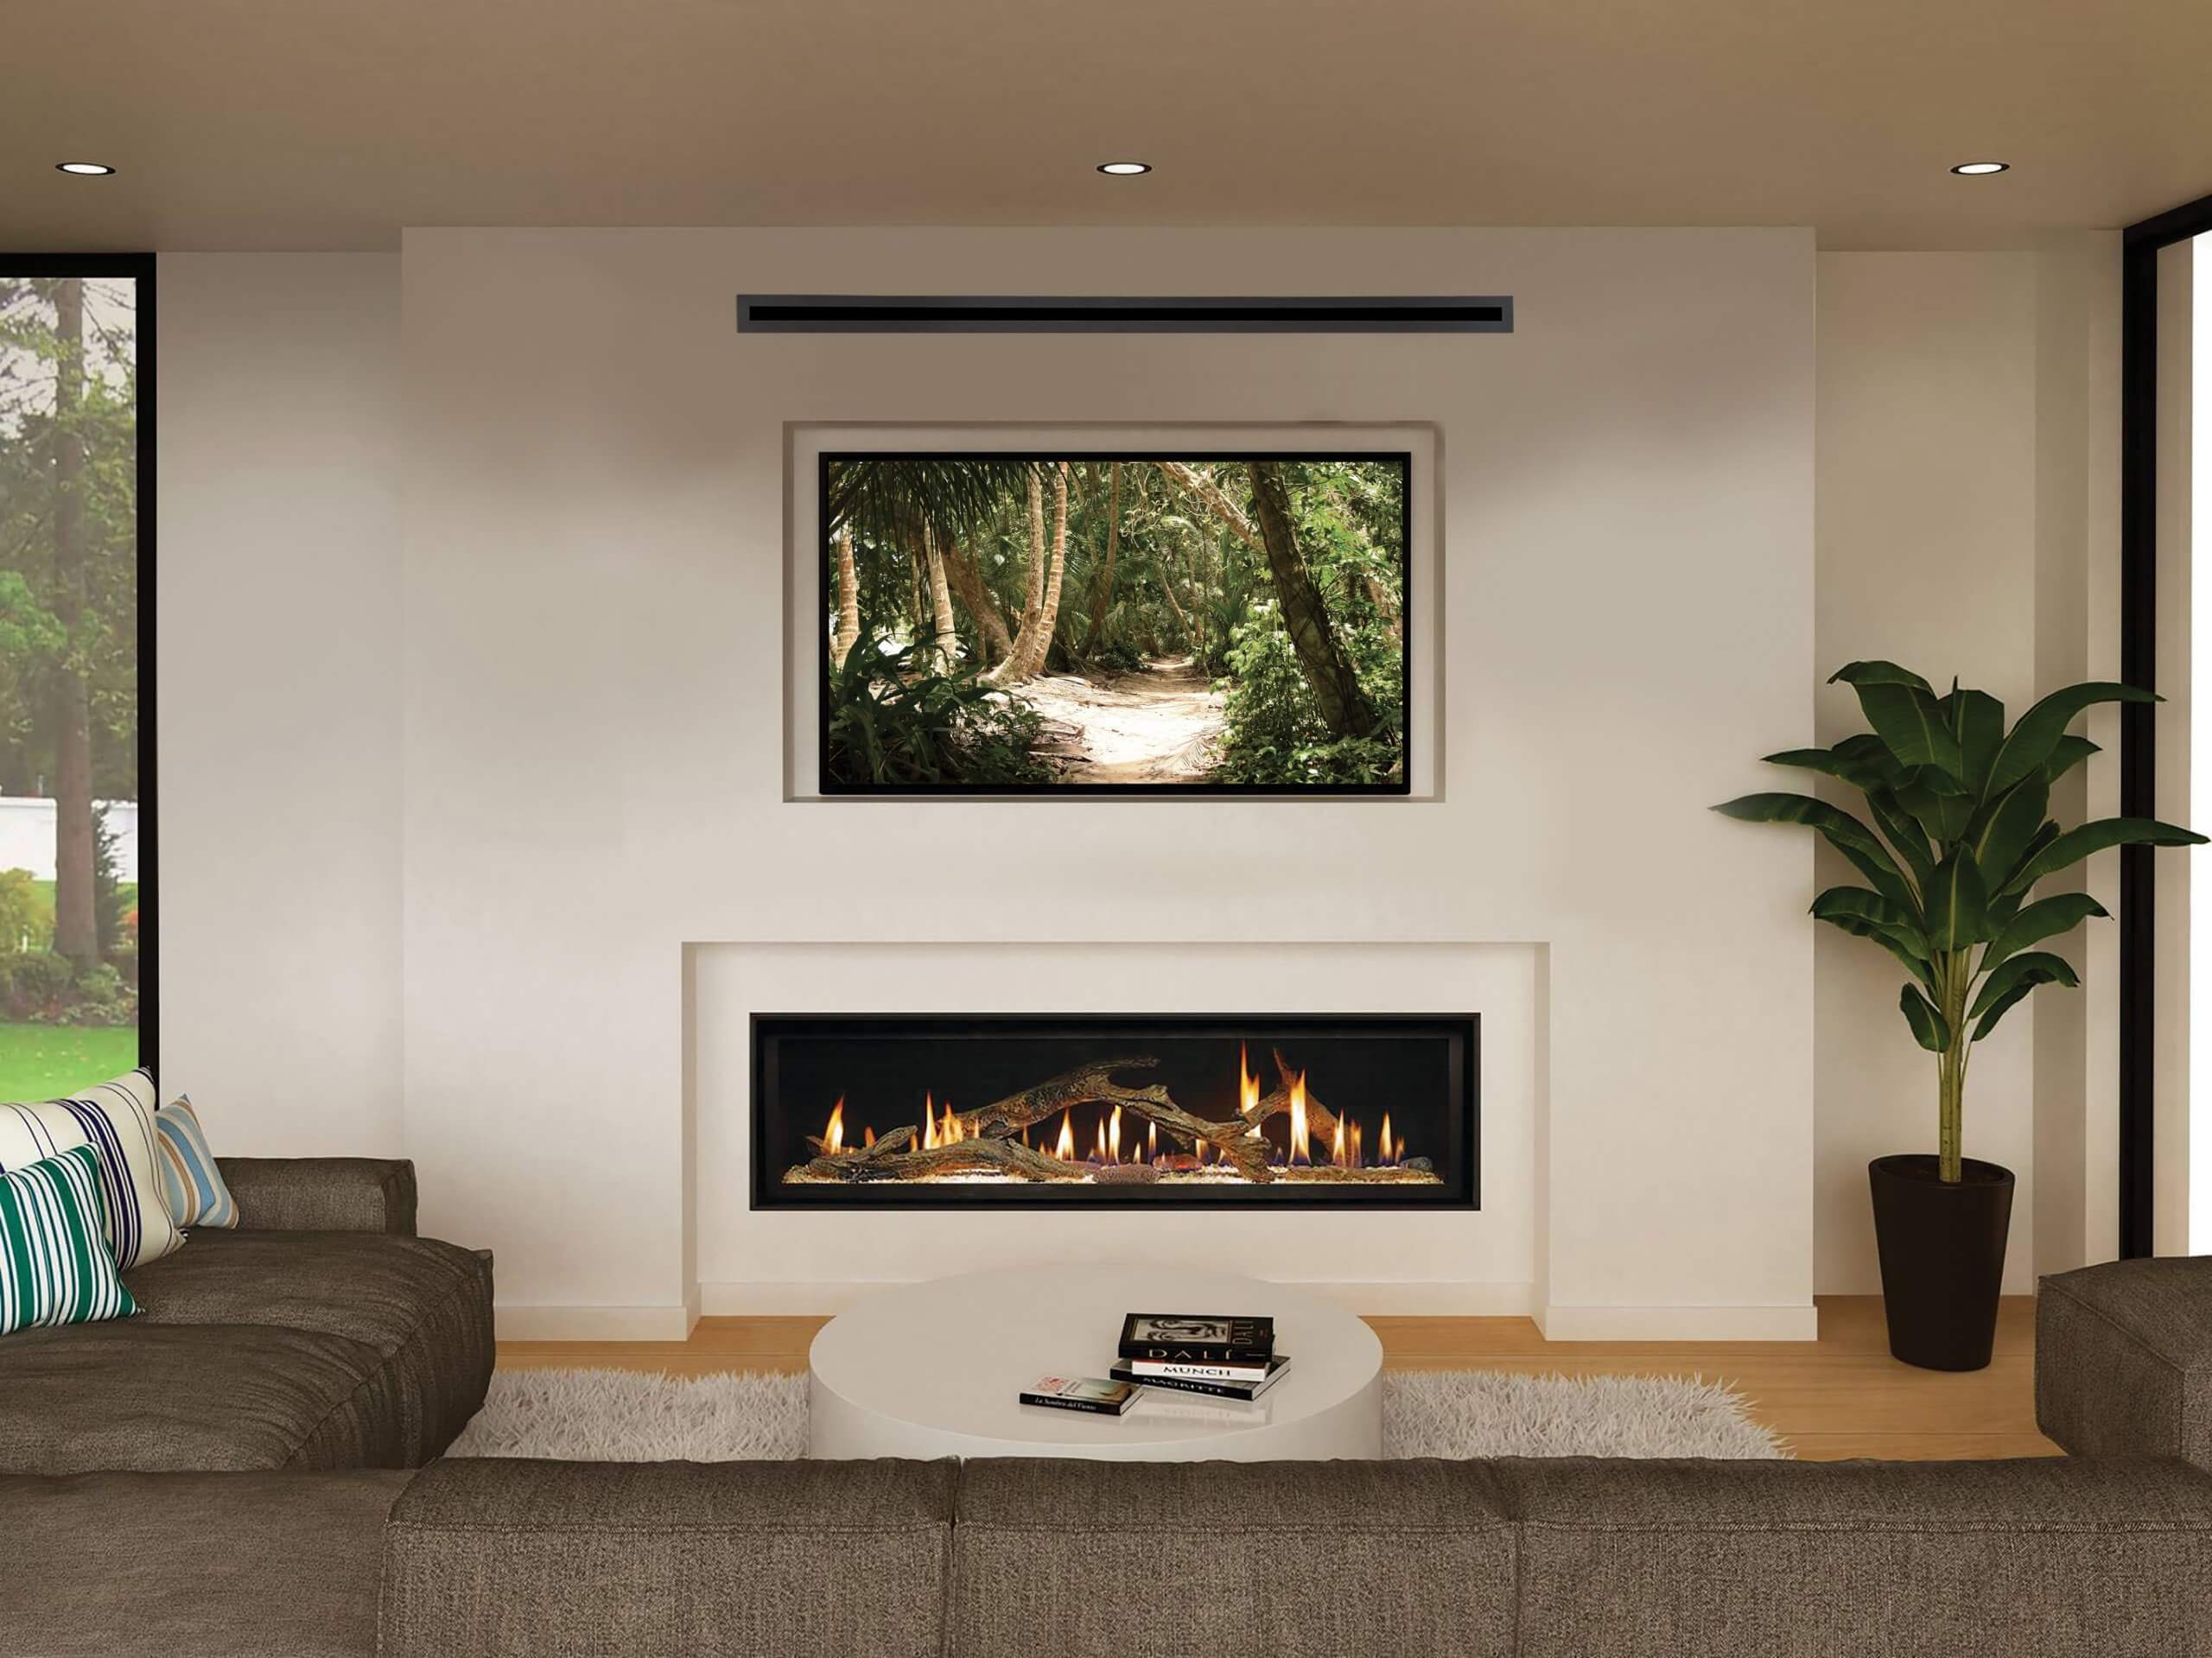 A linear gas fireplace sits beneath a recessed television 